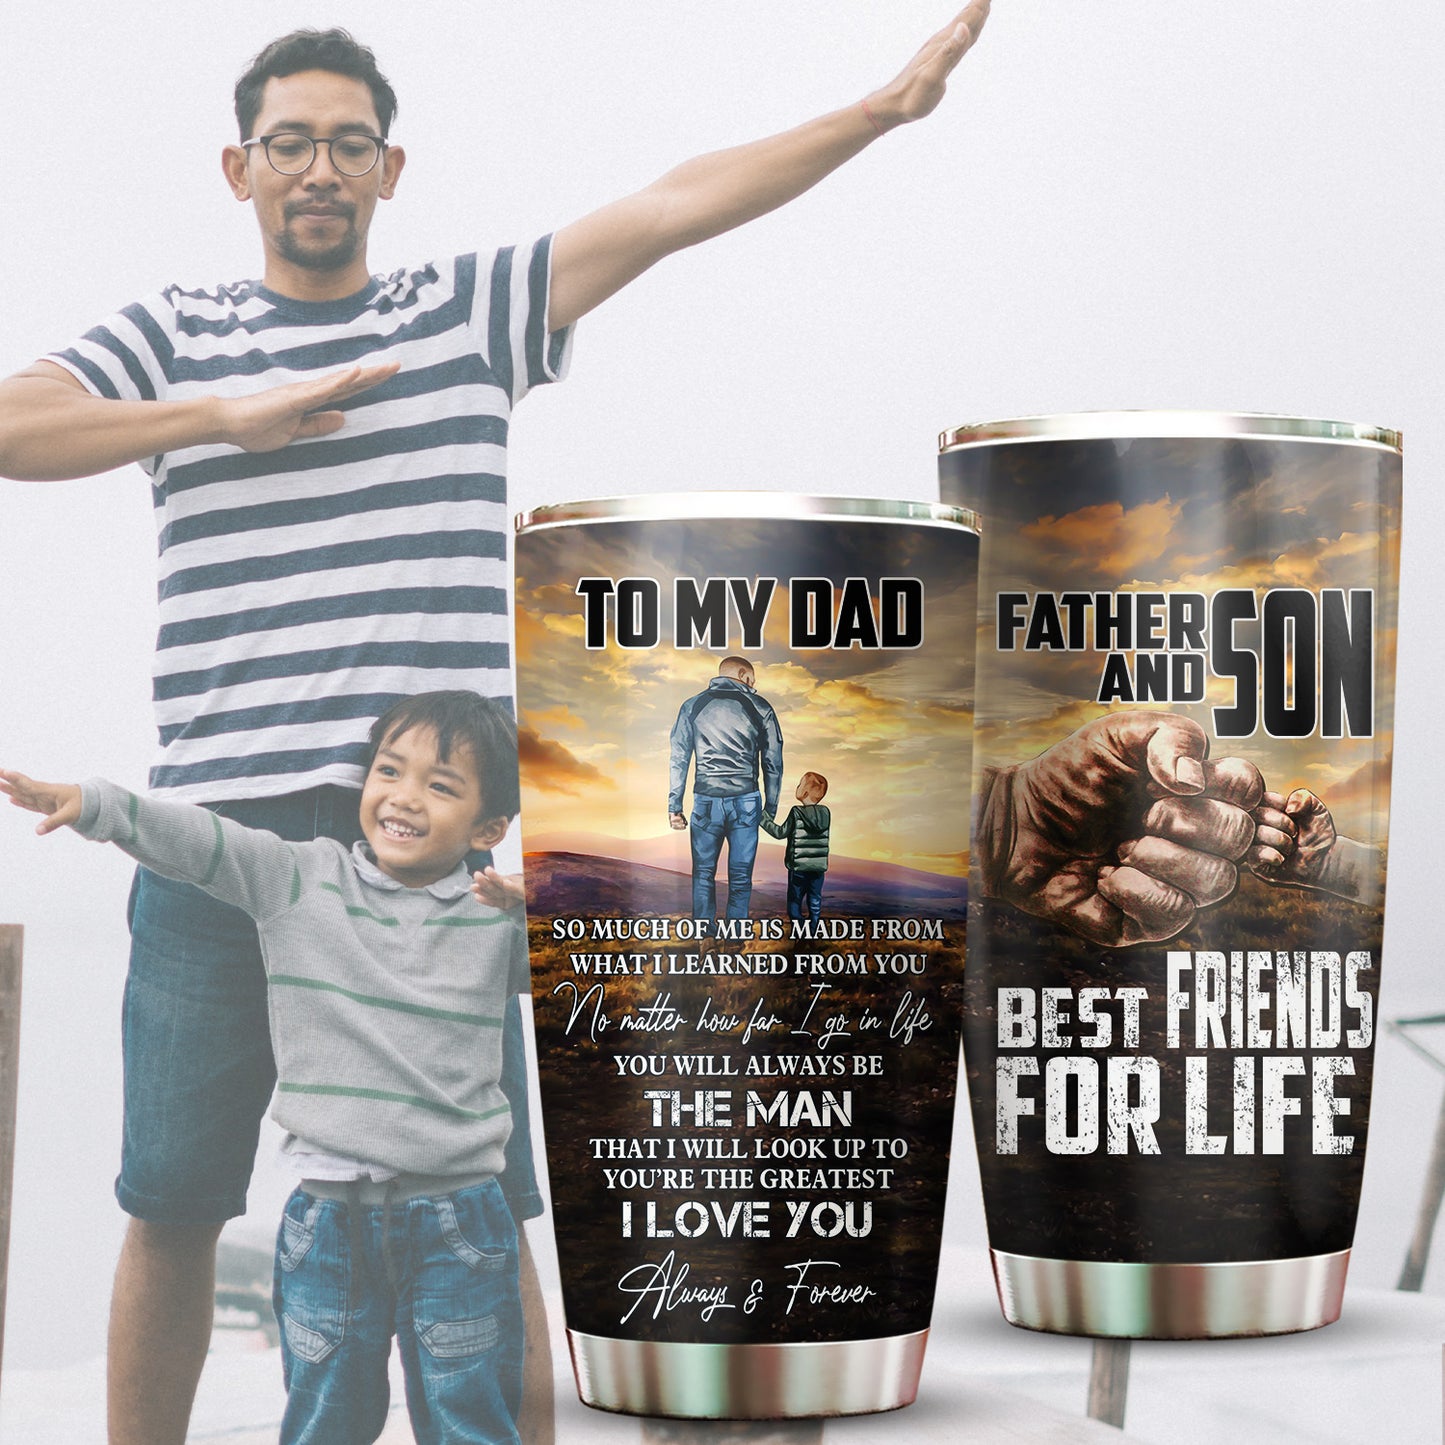 Father And Son Best Friends For Life 20Oz Tumbler